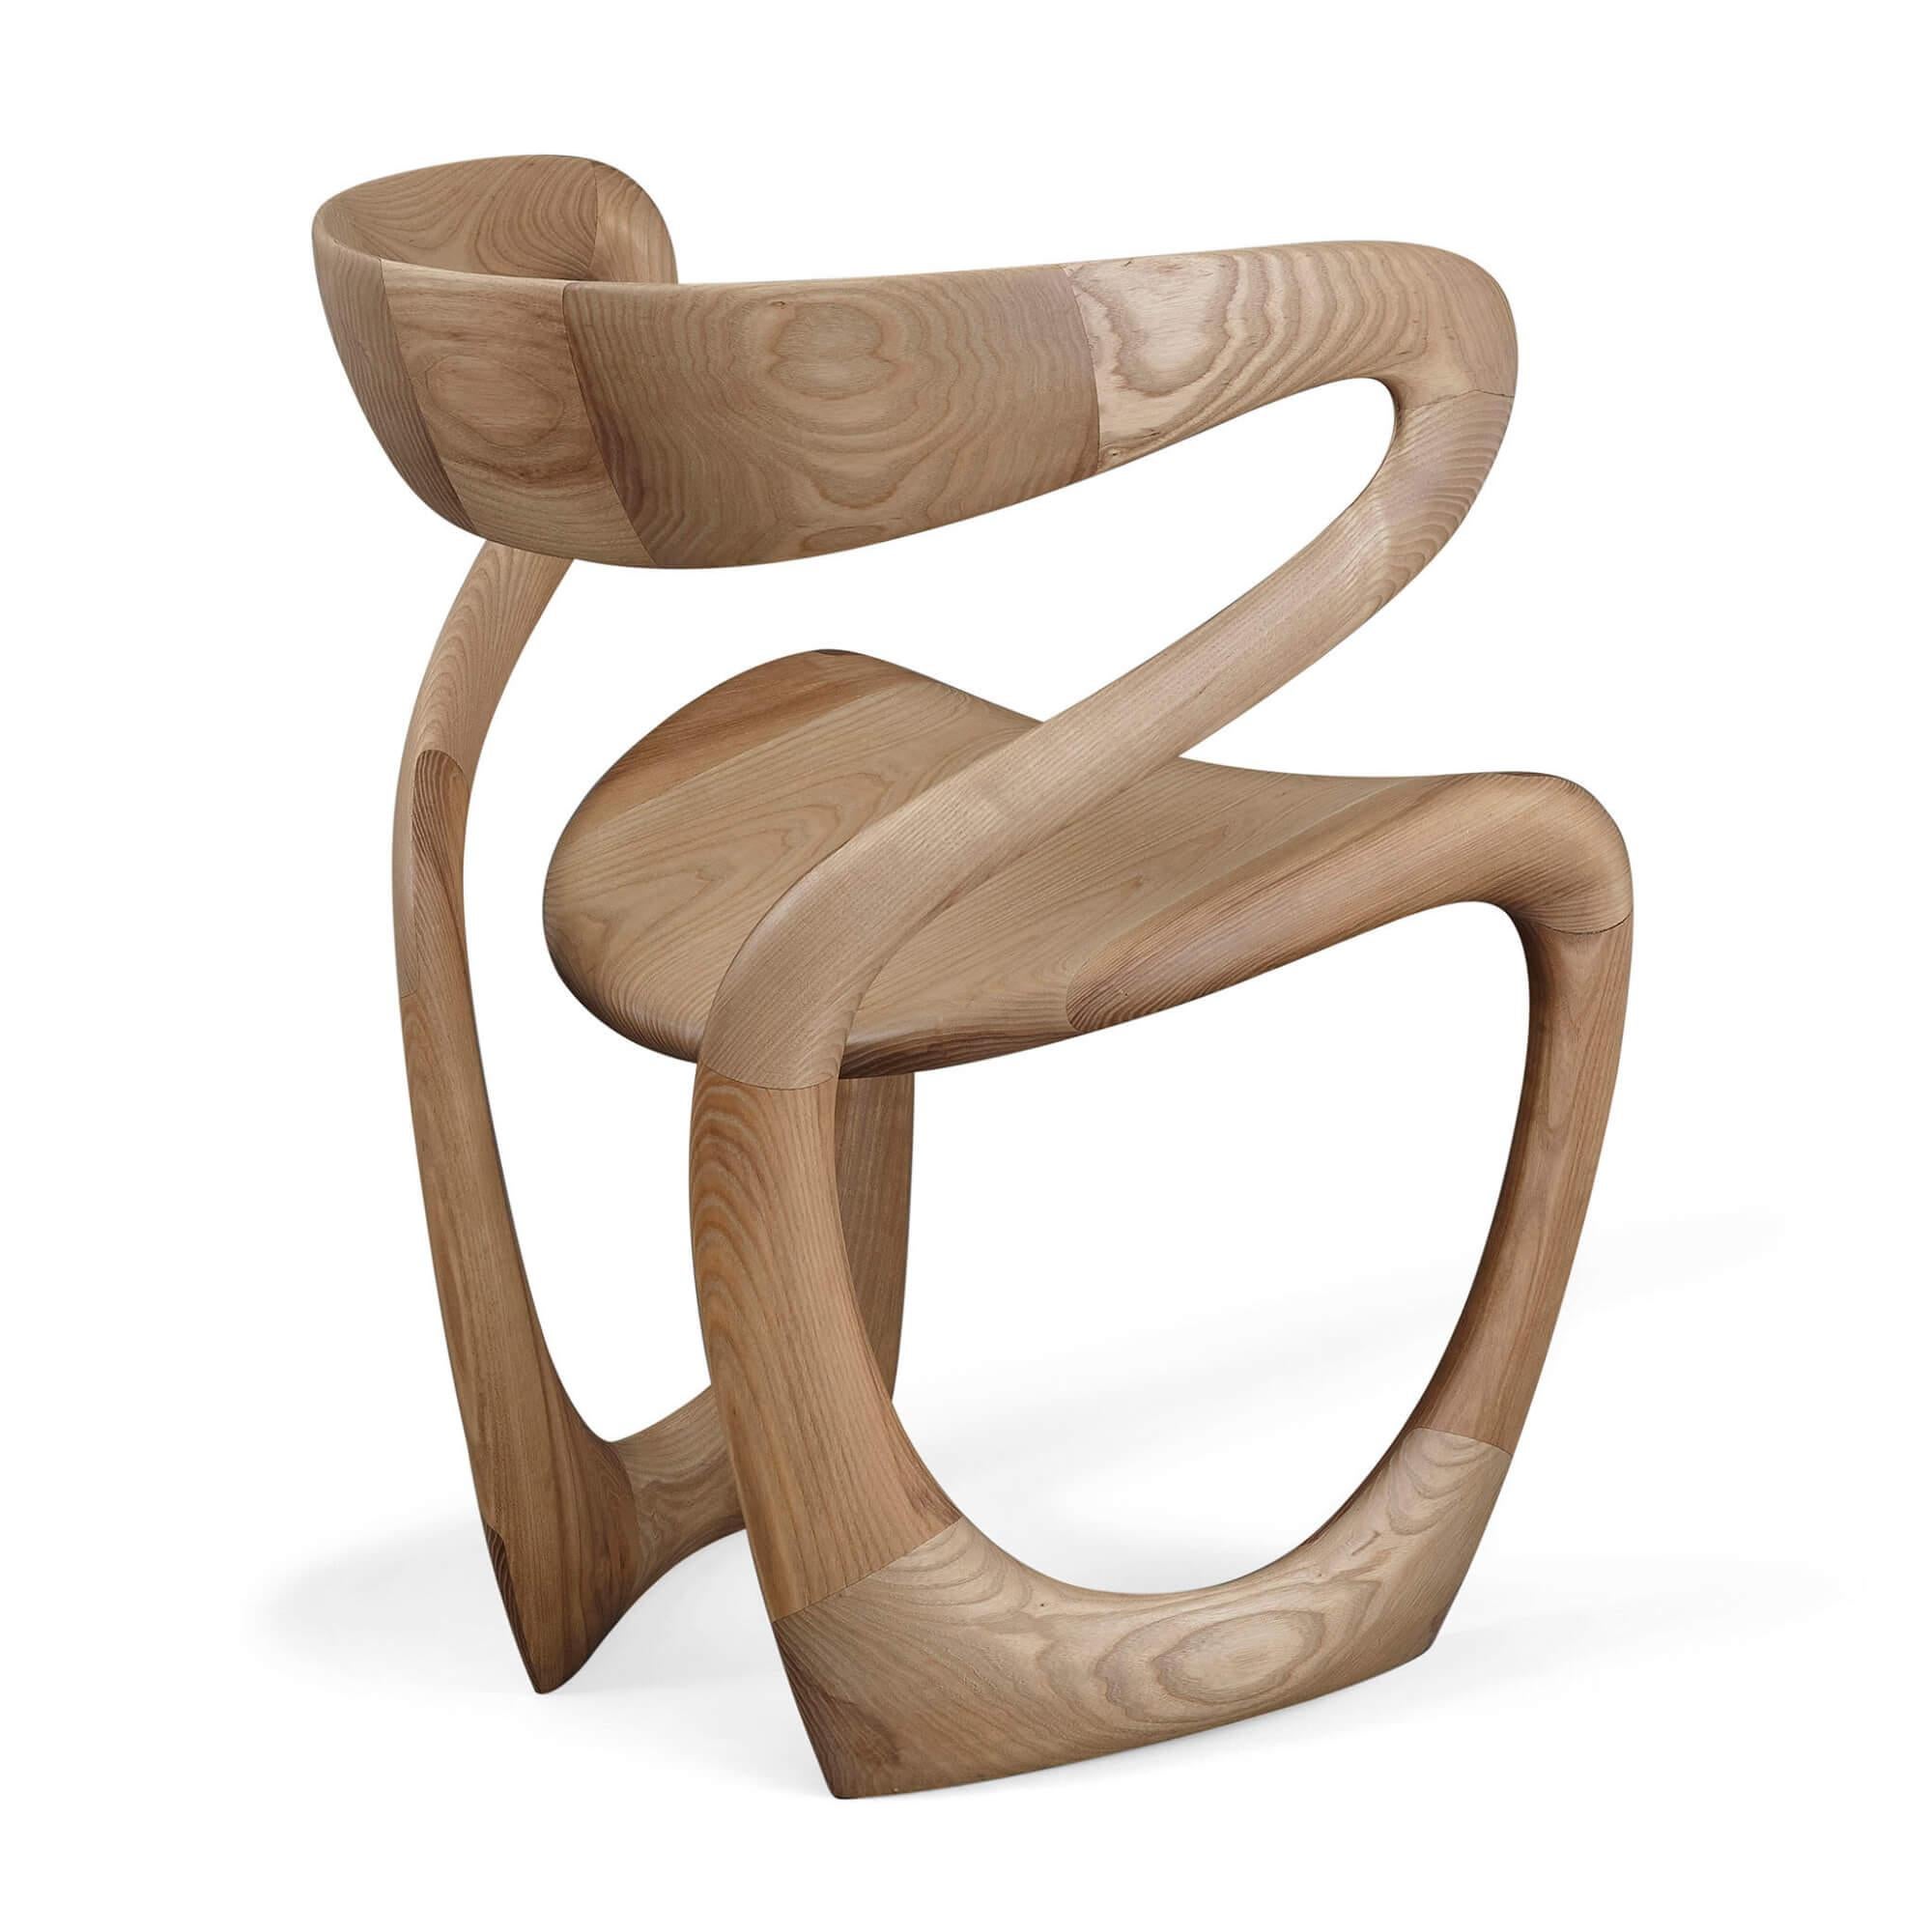 British 'S Chair', Contemporary Abstract Wooden Chair by Tom Vaughan